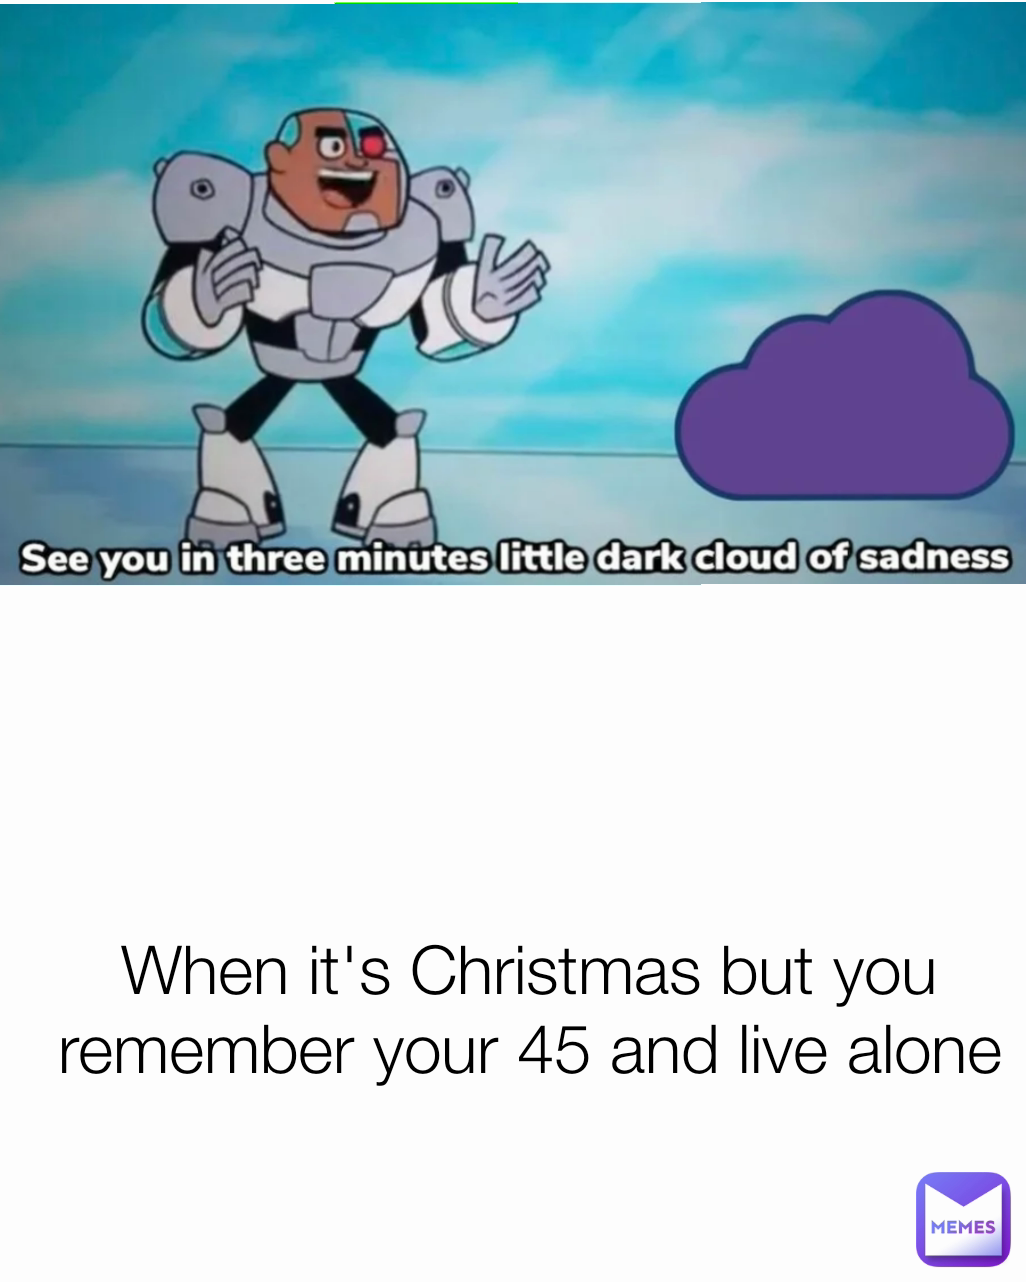 When it's Christmas but you remember your 45 and live alone